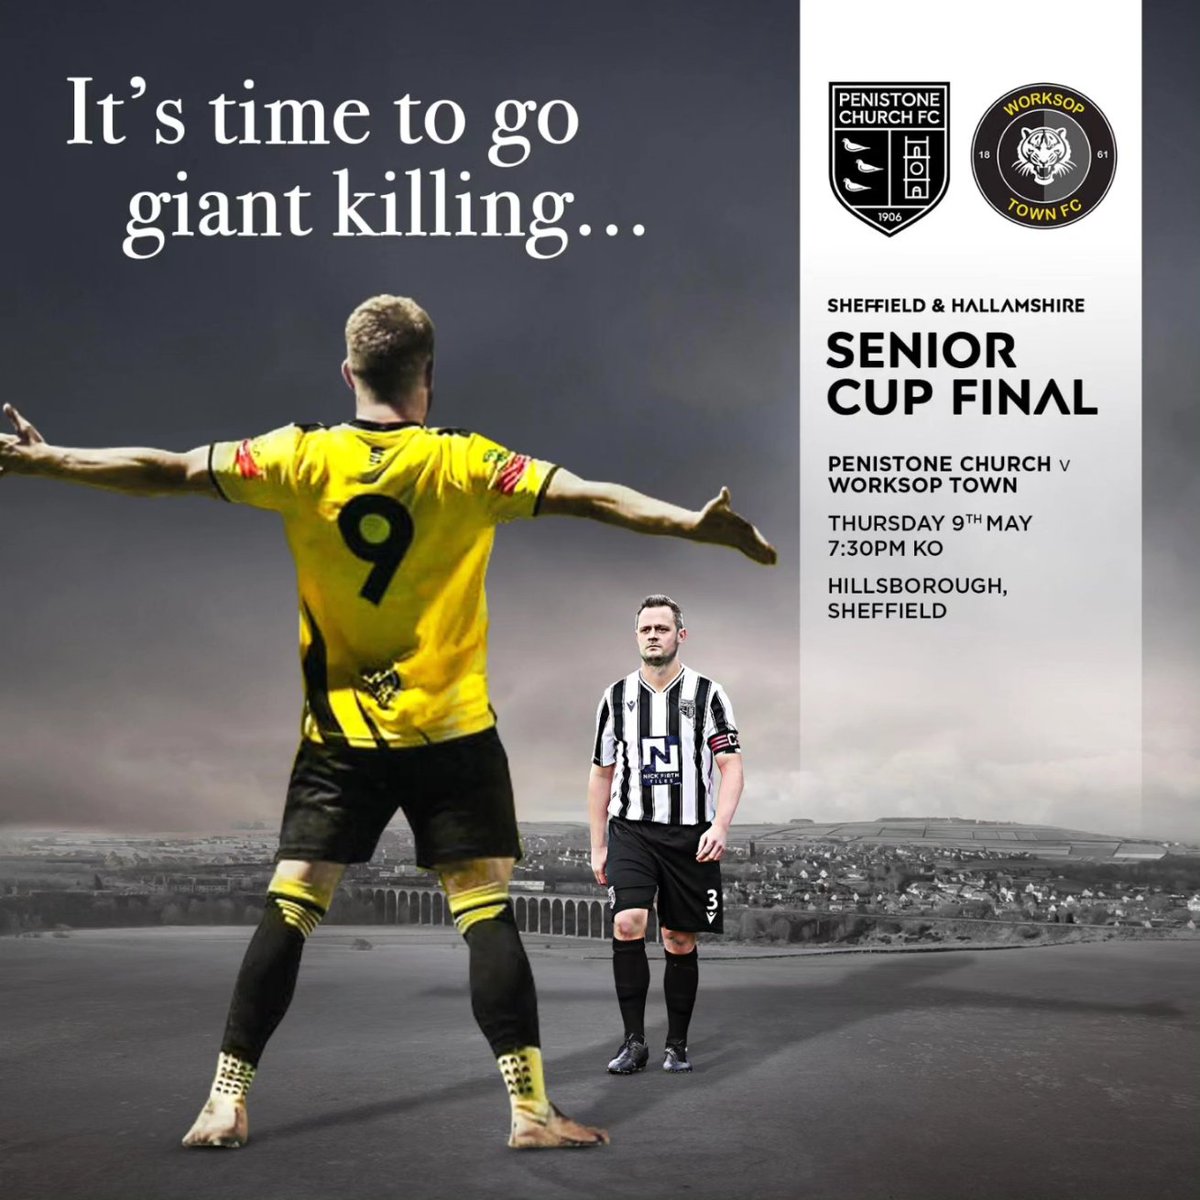 We've still got a few spaces on the 2nd coach for our @SHCFA cup final against @worksoptownfc a week on Thursday - May 9th. To book on please either pop into the clubhouse, or call on 01226370095 after 6pm. All seats £7.50. #UpTheChurch